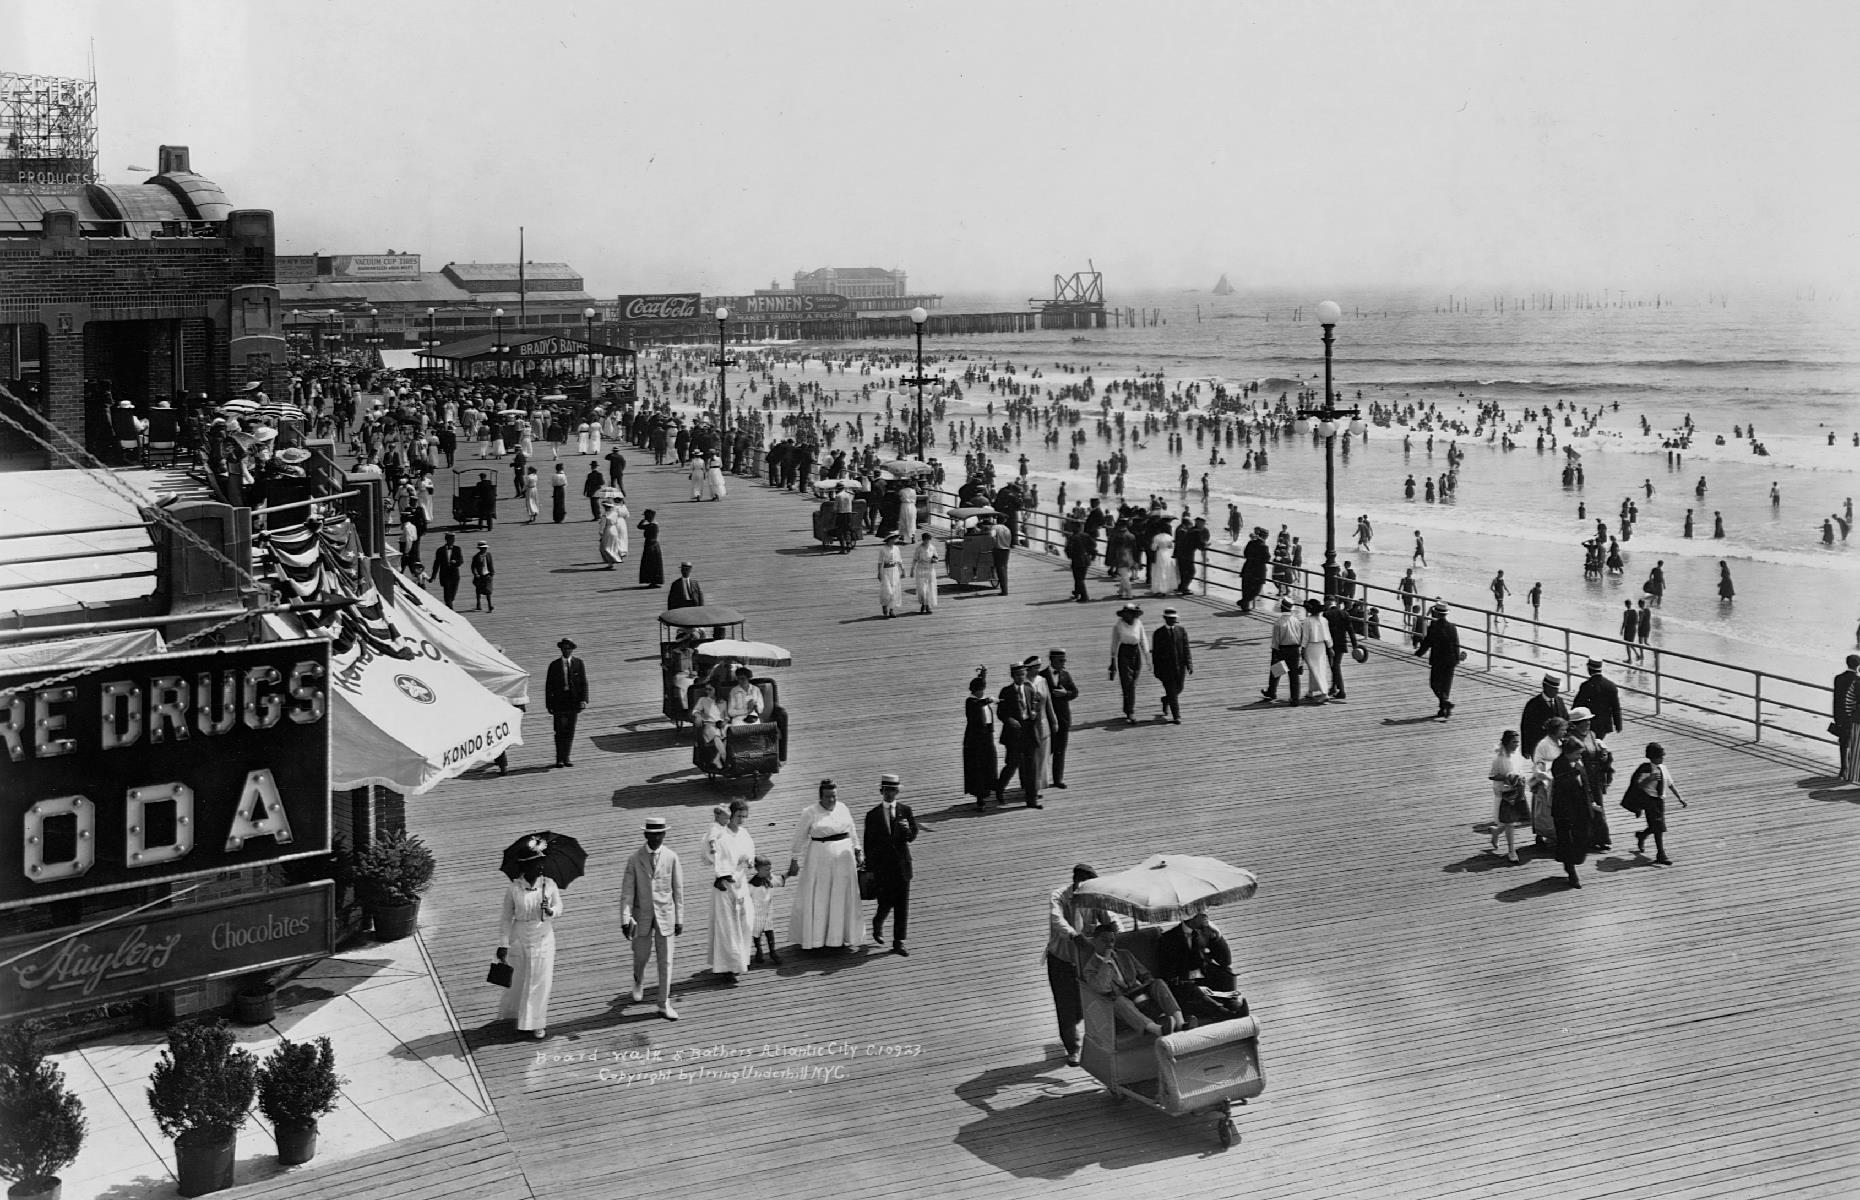 Behind the beach, the Atlantic City Boardwalk, with its hotels, restaurants and casinos, hums with activity too. These vacationers are captured in 1915, several decades after the popular wooden pathway was first completed. The umbrella-topped "rolling chairs" were (and still remain) a popular way to travel around here.